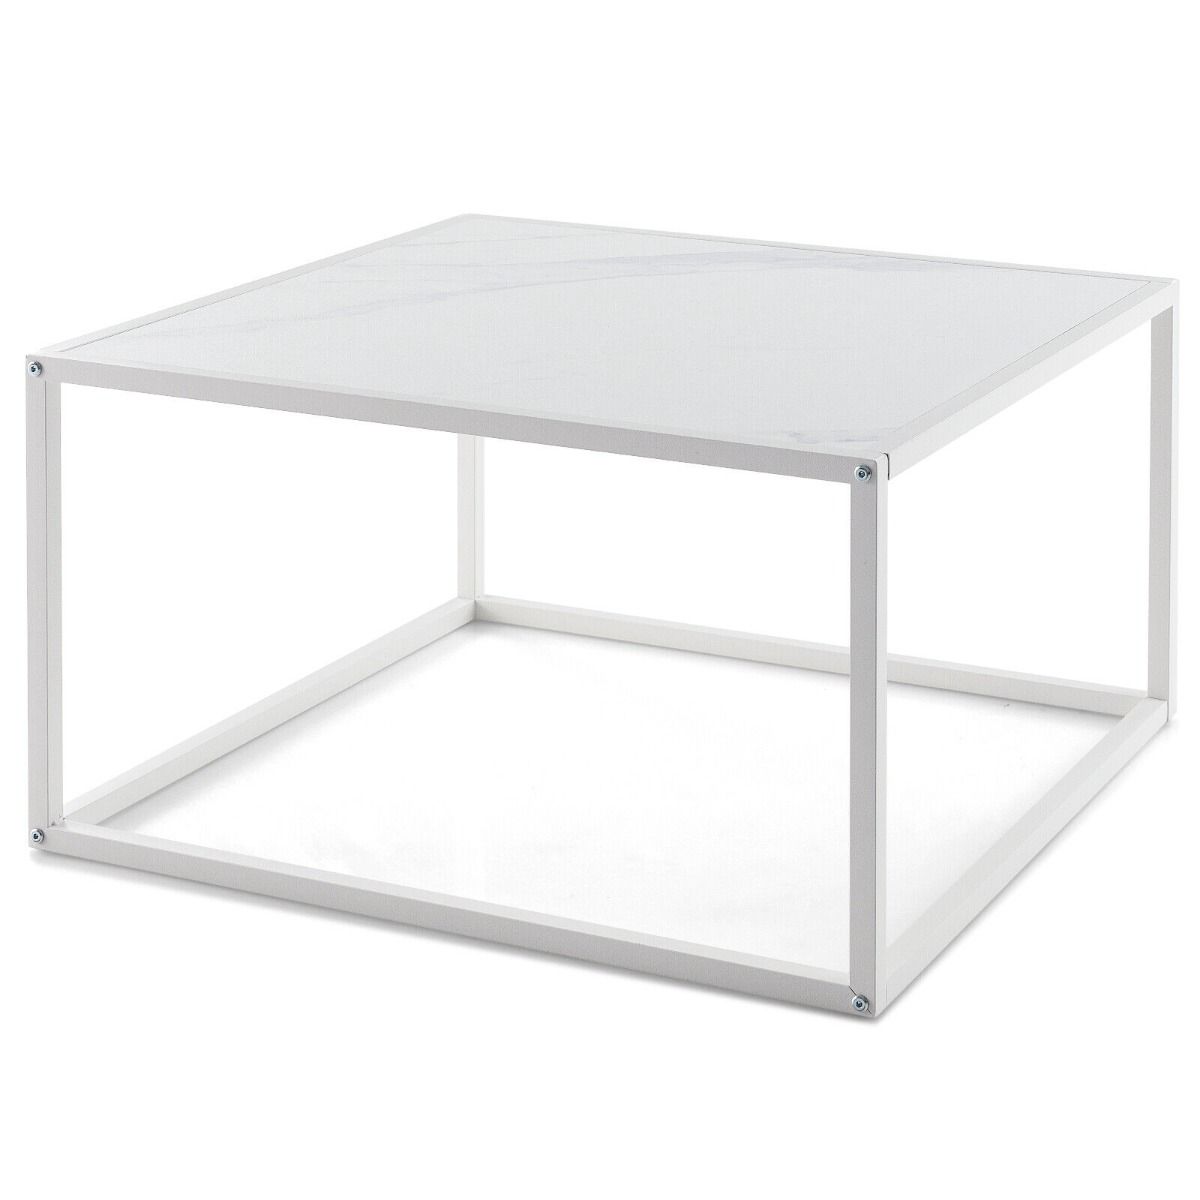 Modern Square Leisure Coffee Table with Faux Marble Tabletop